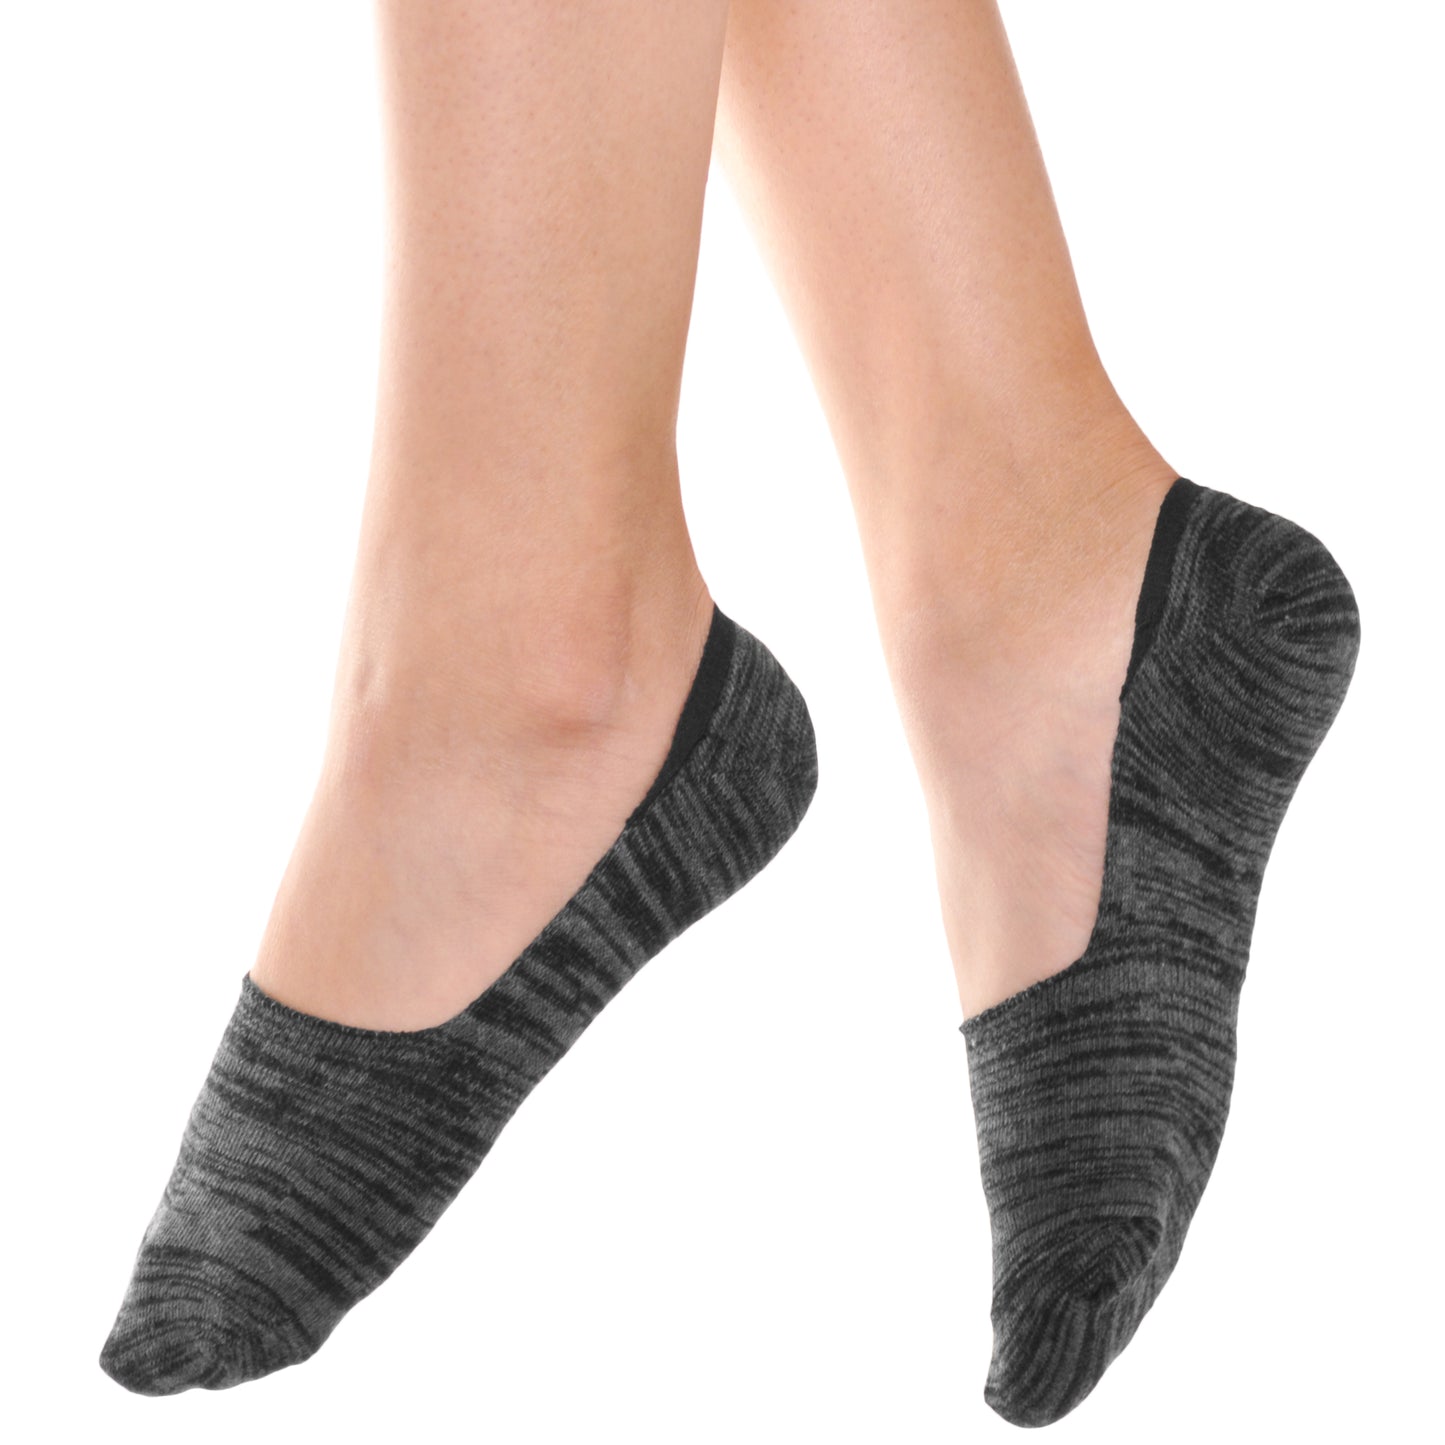 Angelina Unisex Cotton Blend Liner Sock with Non-Slip Heel Grip (12-Pairs), #SK10